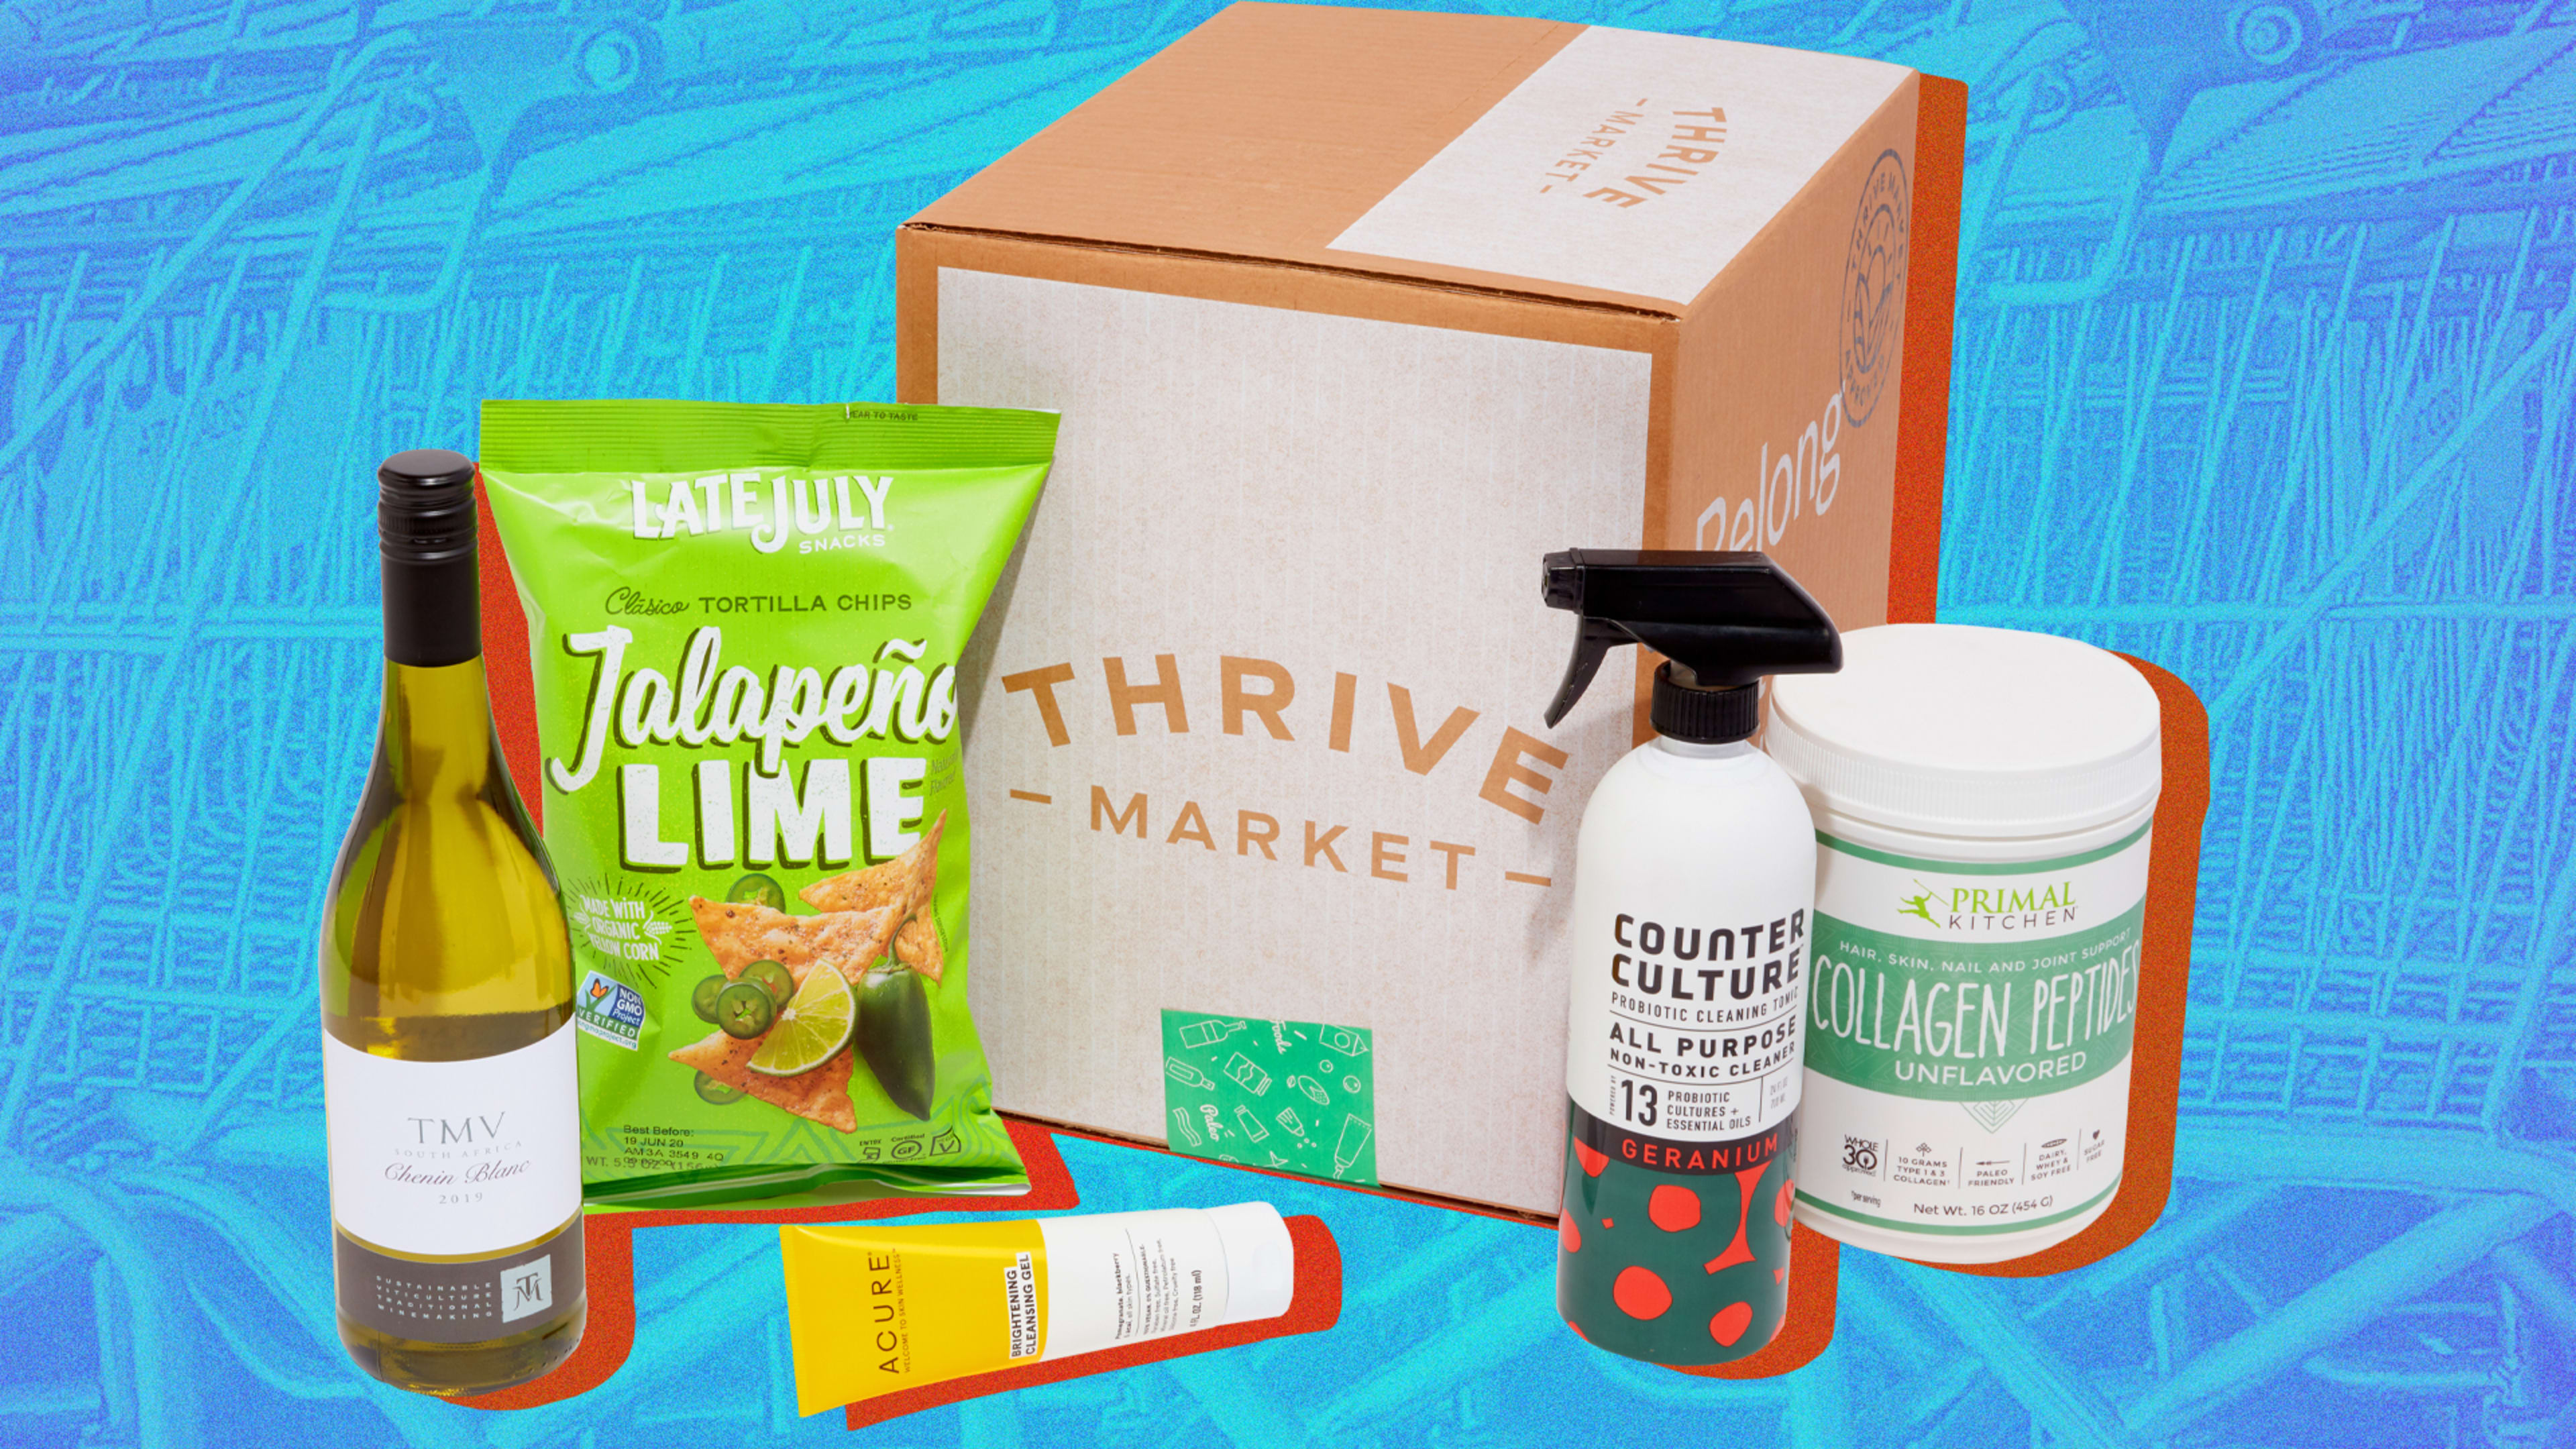 How Thrive became the leading Amazon alternative for affordable, organic groceries